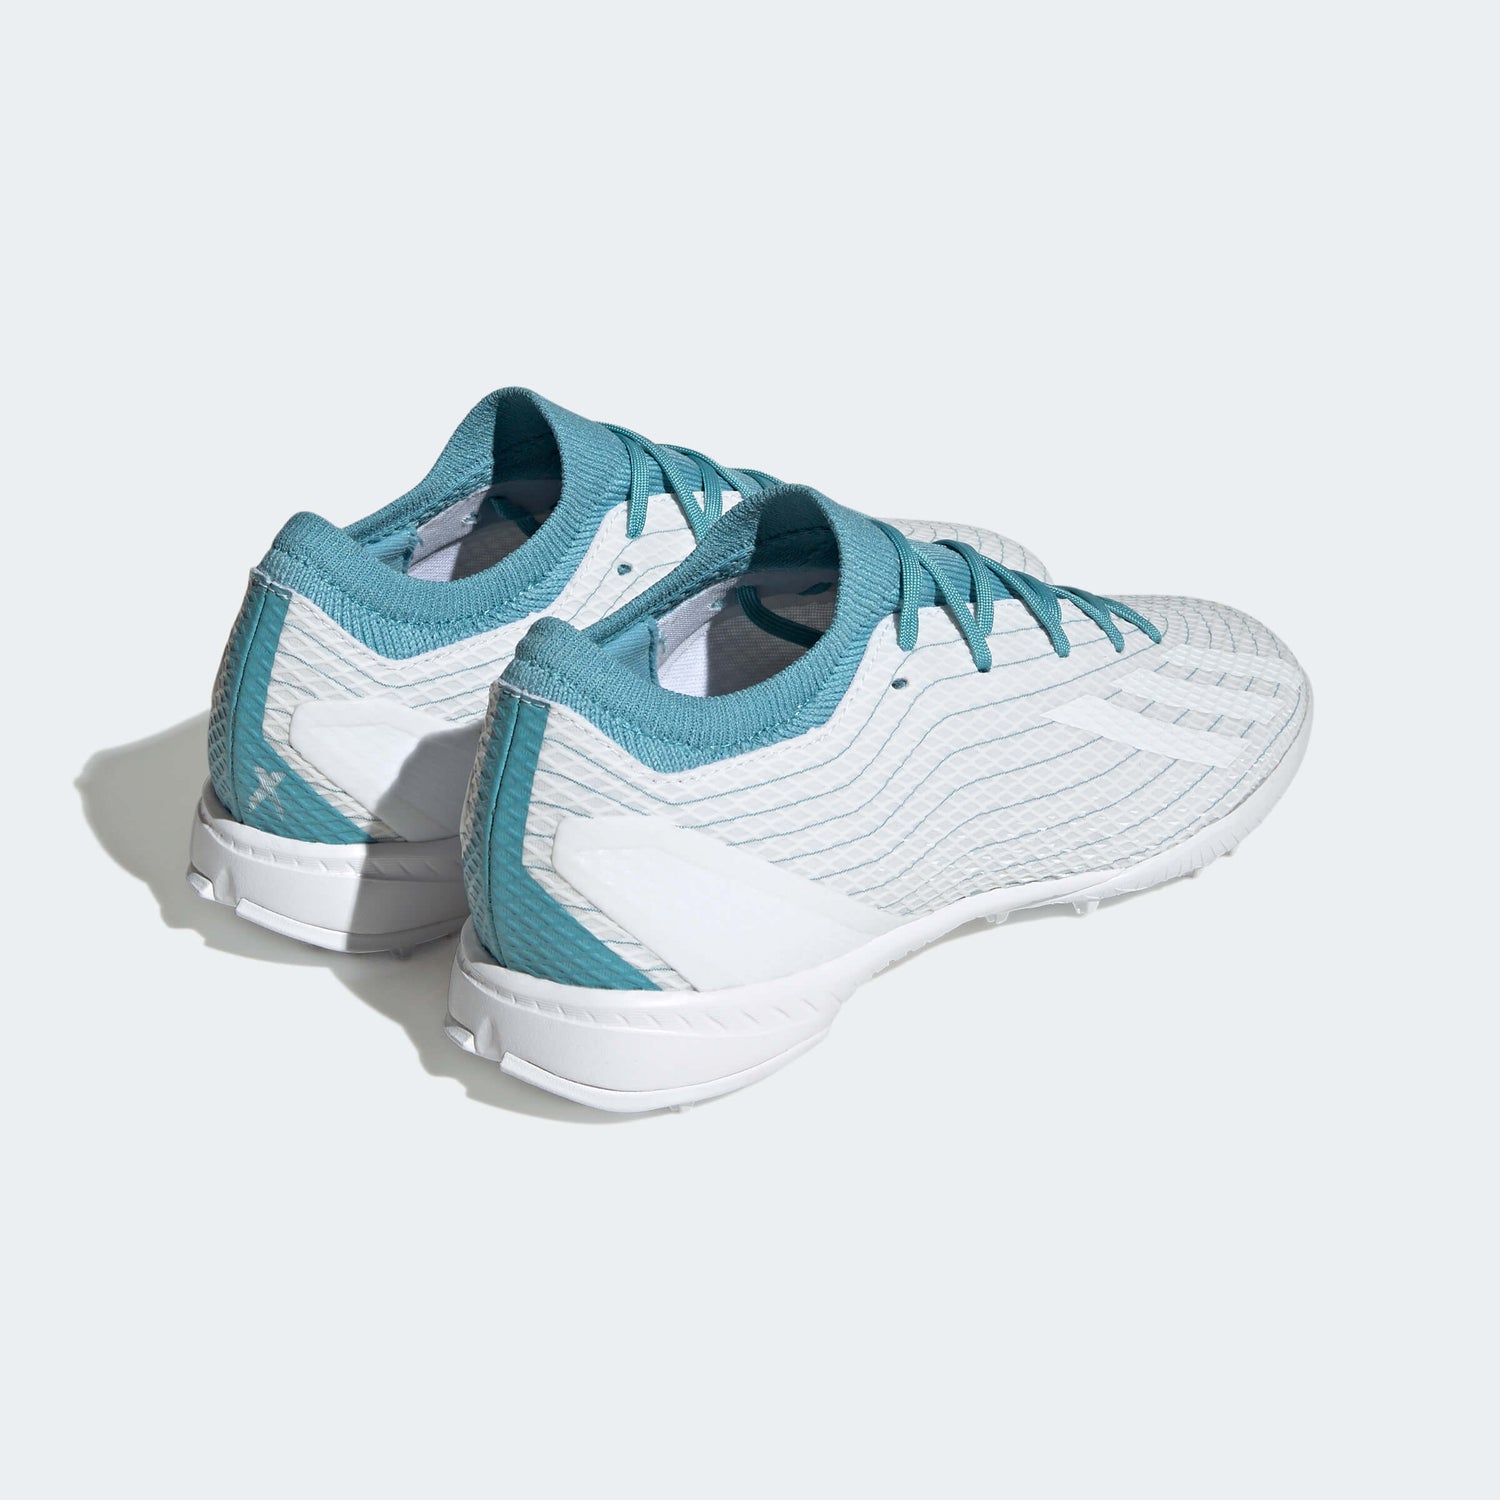 adidas X Speedportal.3 Turf - Parley Pack (SP23) (Pair - Back Lateral)